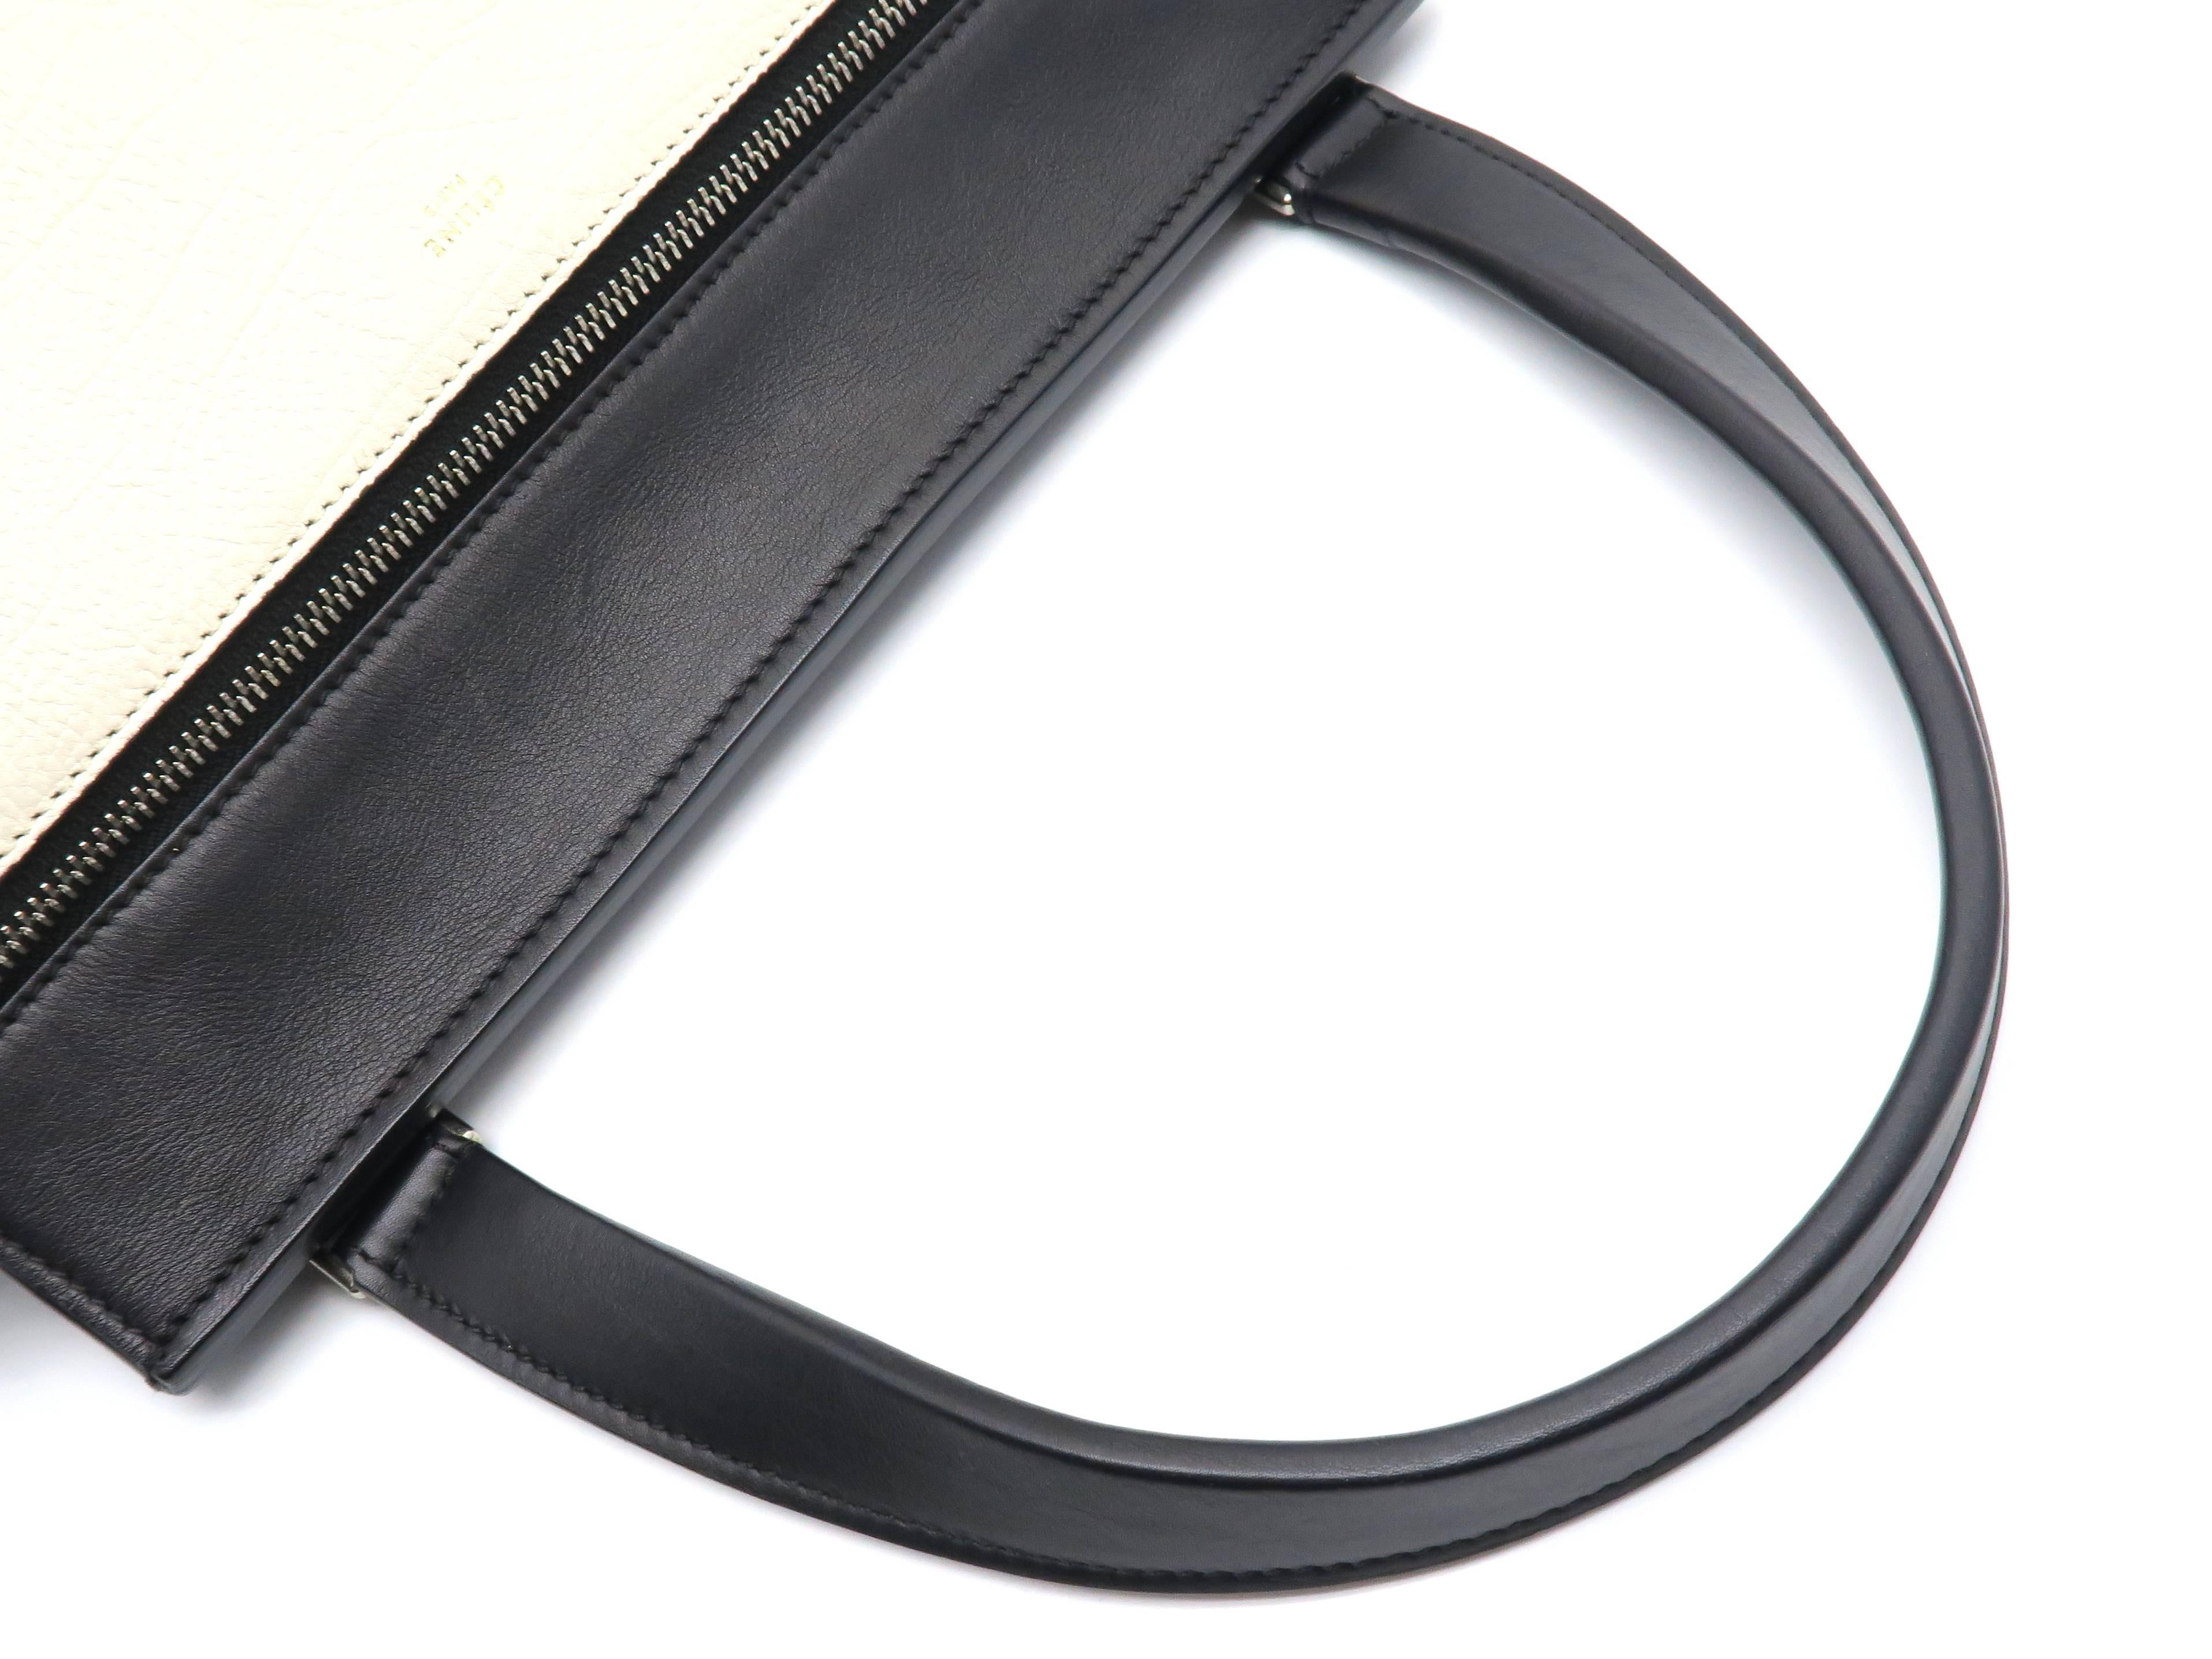 Celine Edge Black/White Calfskin Leather Shoulder Bag In Excellent Condition For Sale In Kowloon, HK